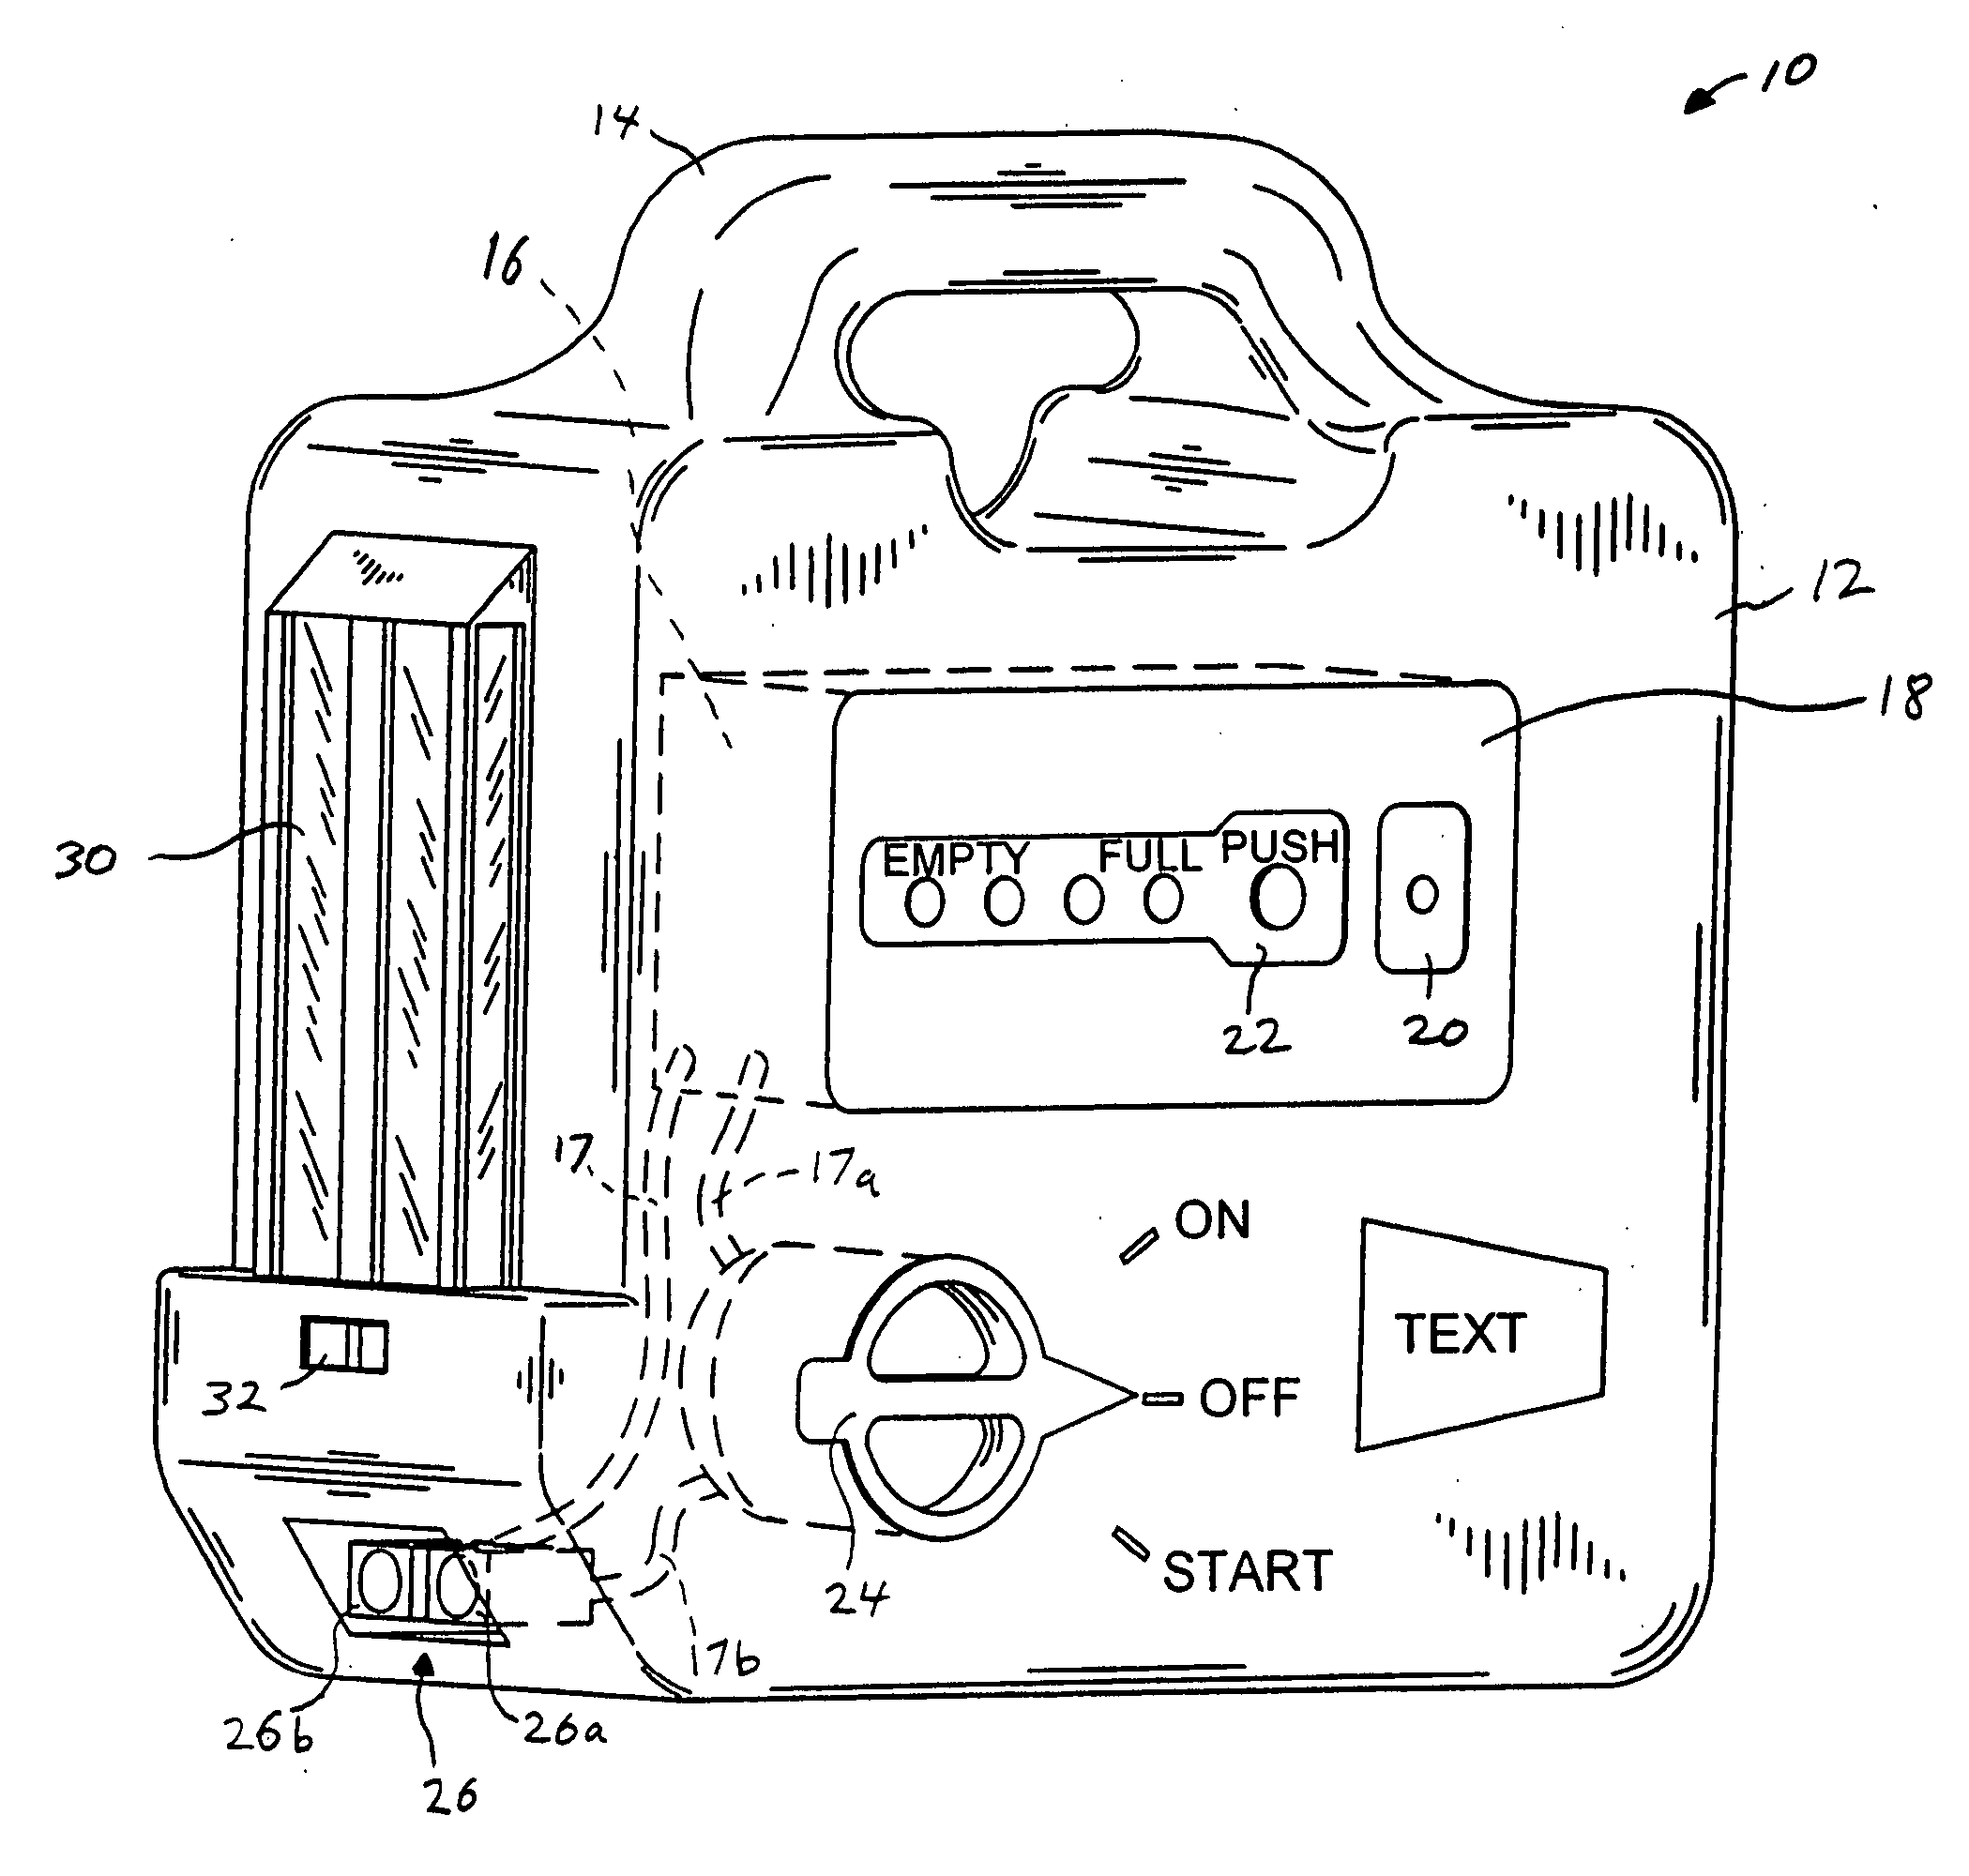 Method of and system for starting engine-driven power equipment